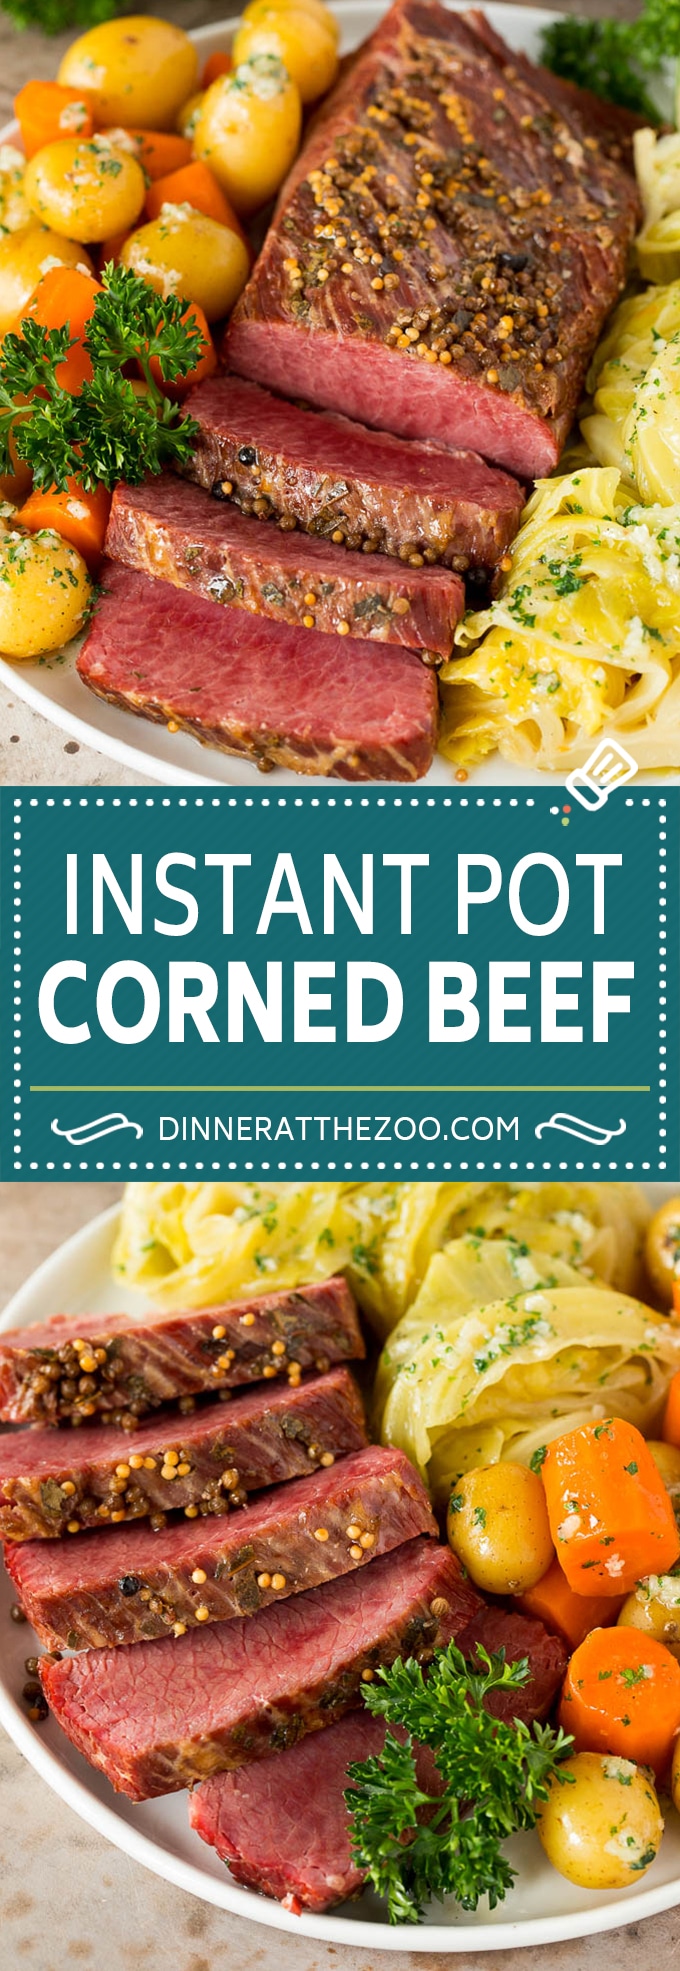 This Instant Pot corned beef is pressure cooked until tender, then served with potatoes, cabbage and carrots.